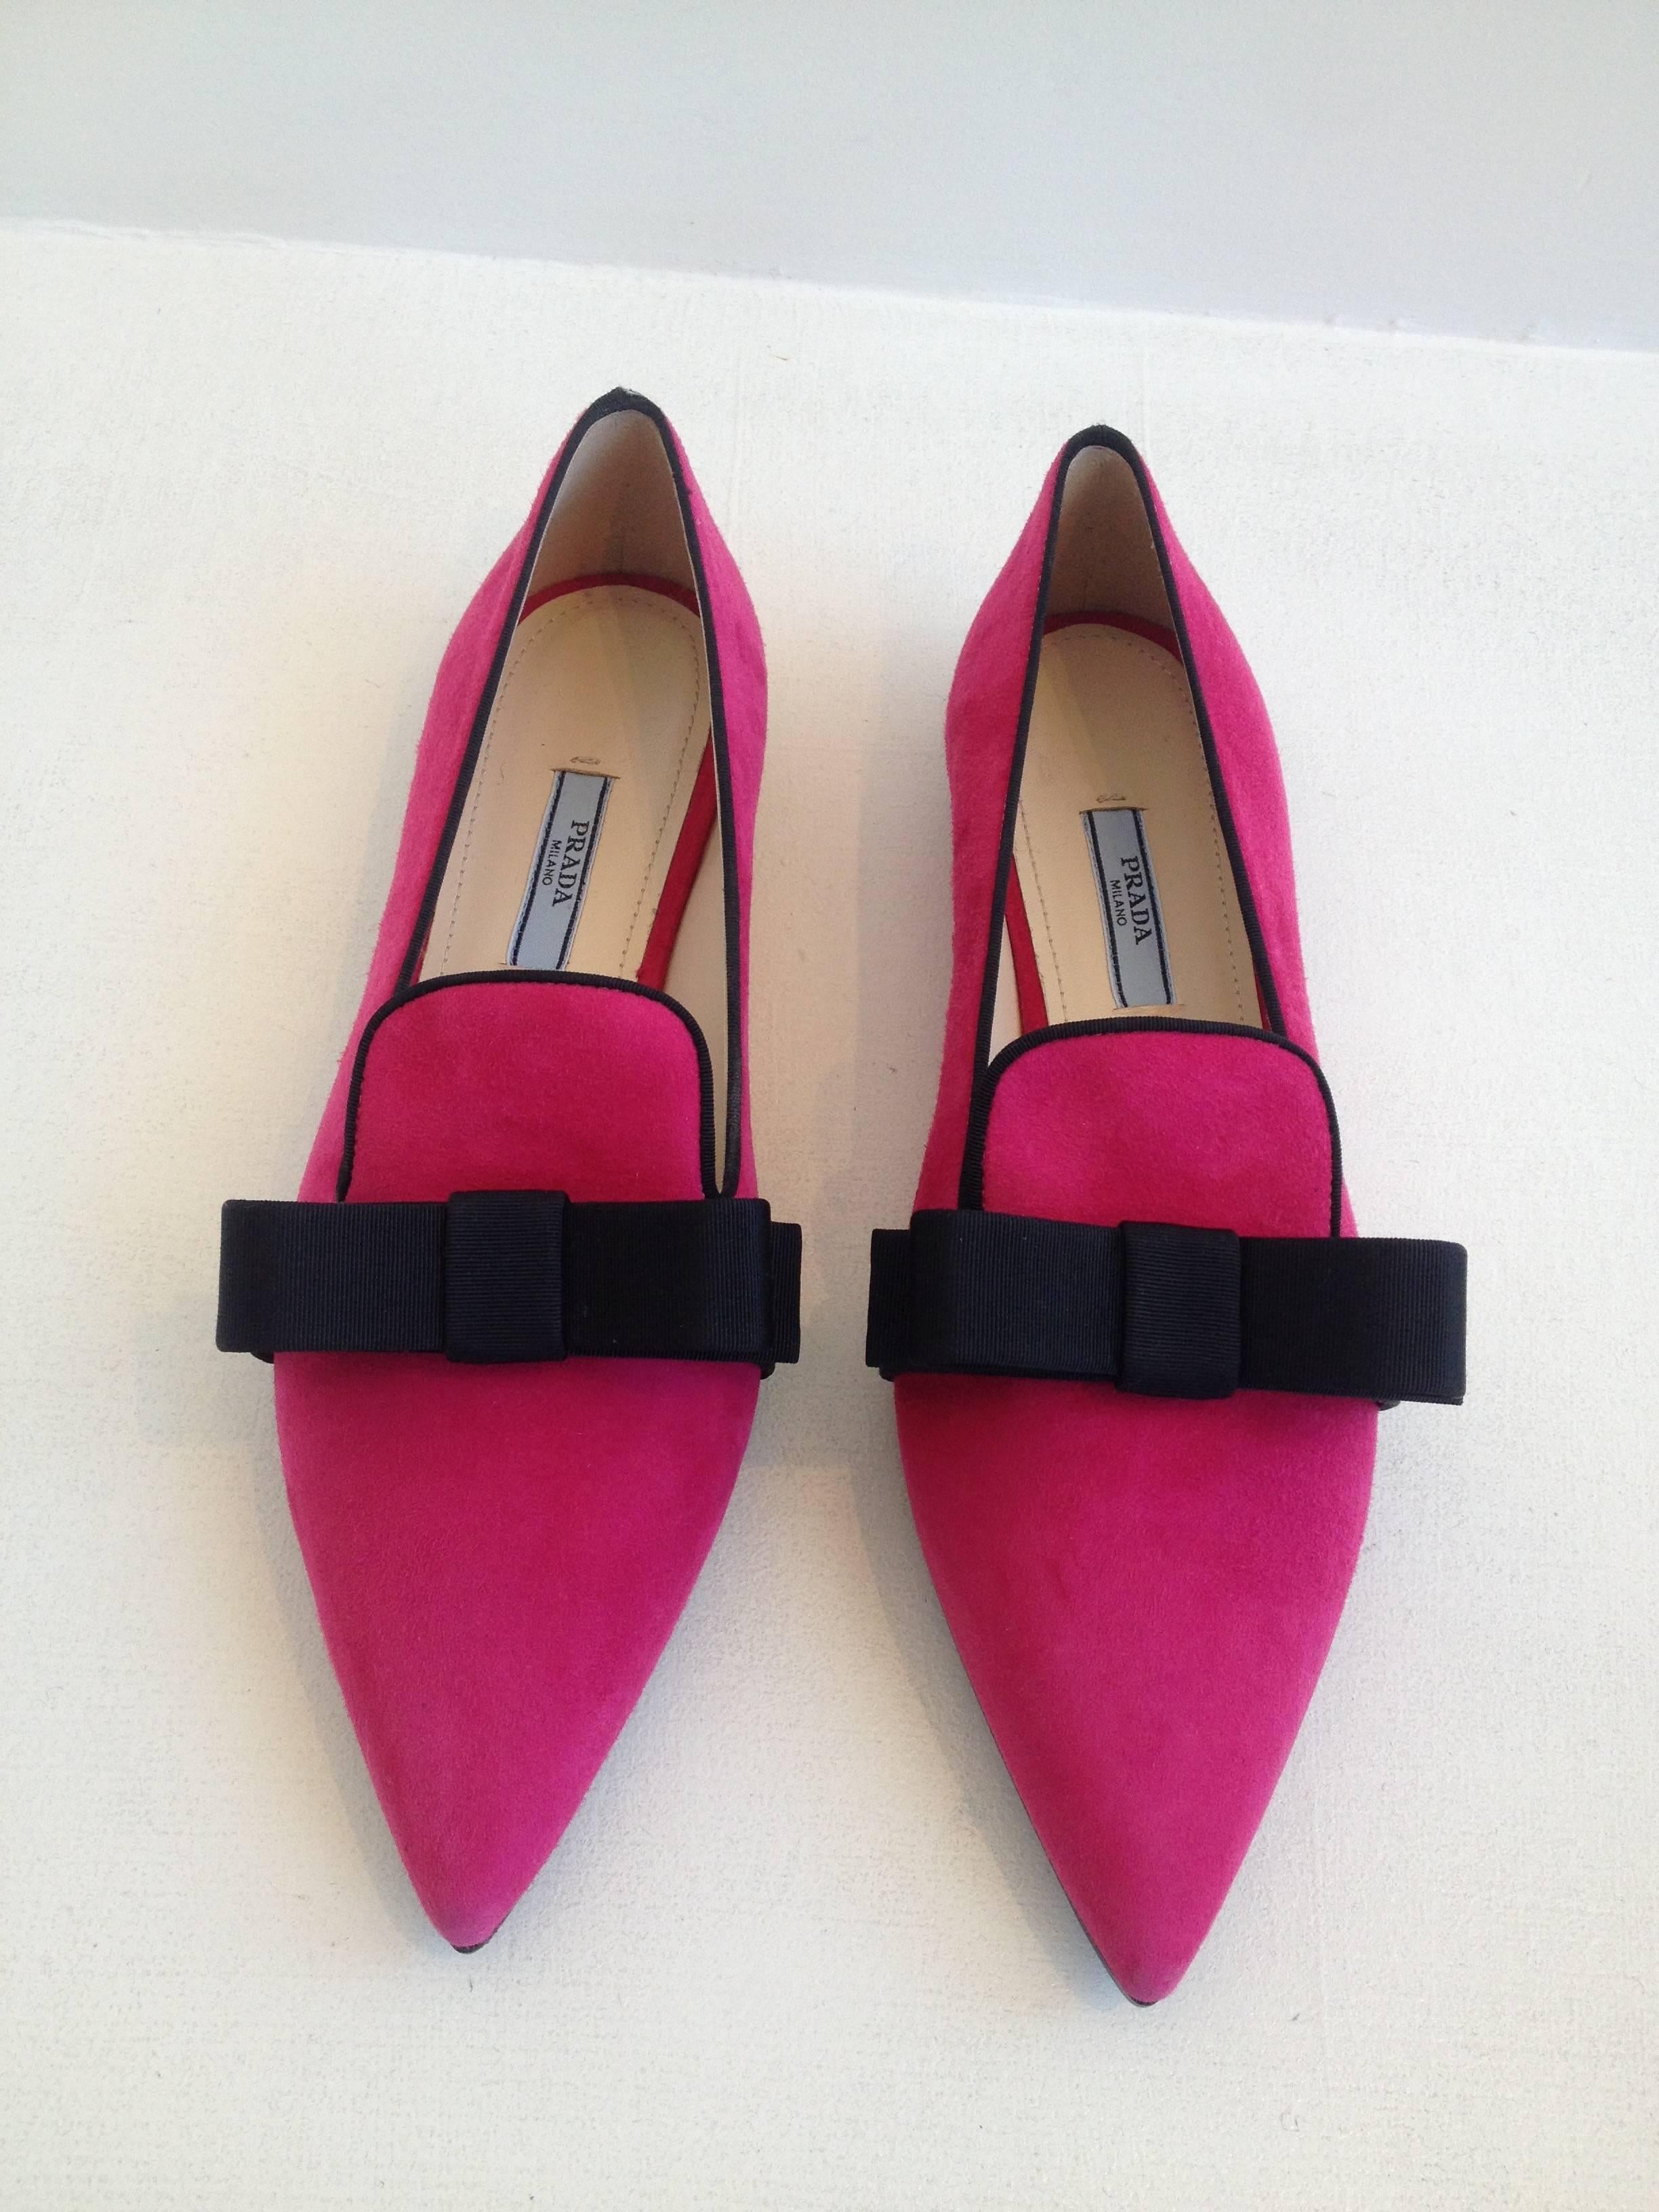 Nothing adds quite so much fun to your look as a pair of pink suede skimmers. These are trimmed with oversized black grosgrain bows on each pointy toe, adding the perfect contrast to the pink. Wear with anything from a party dress to black pants and